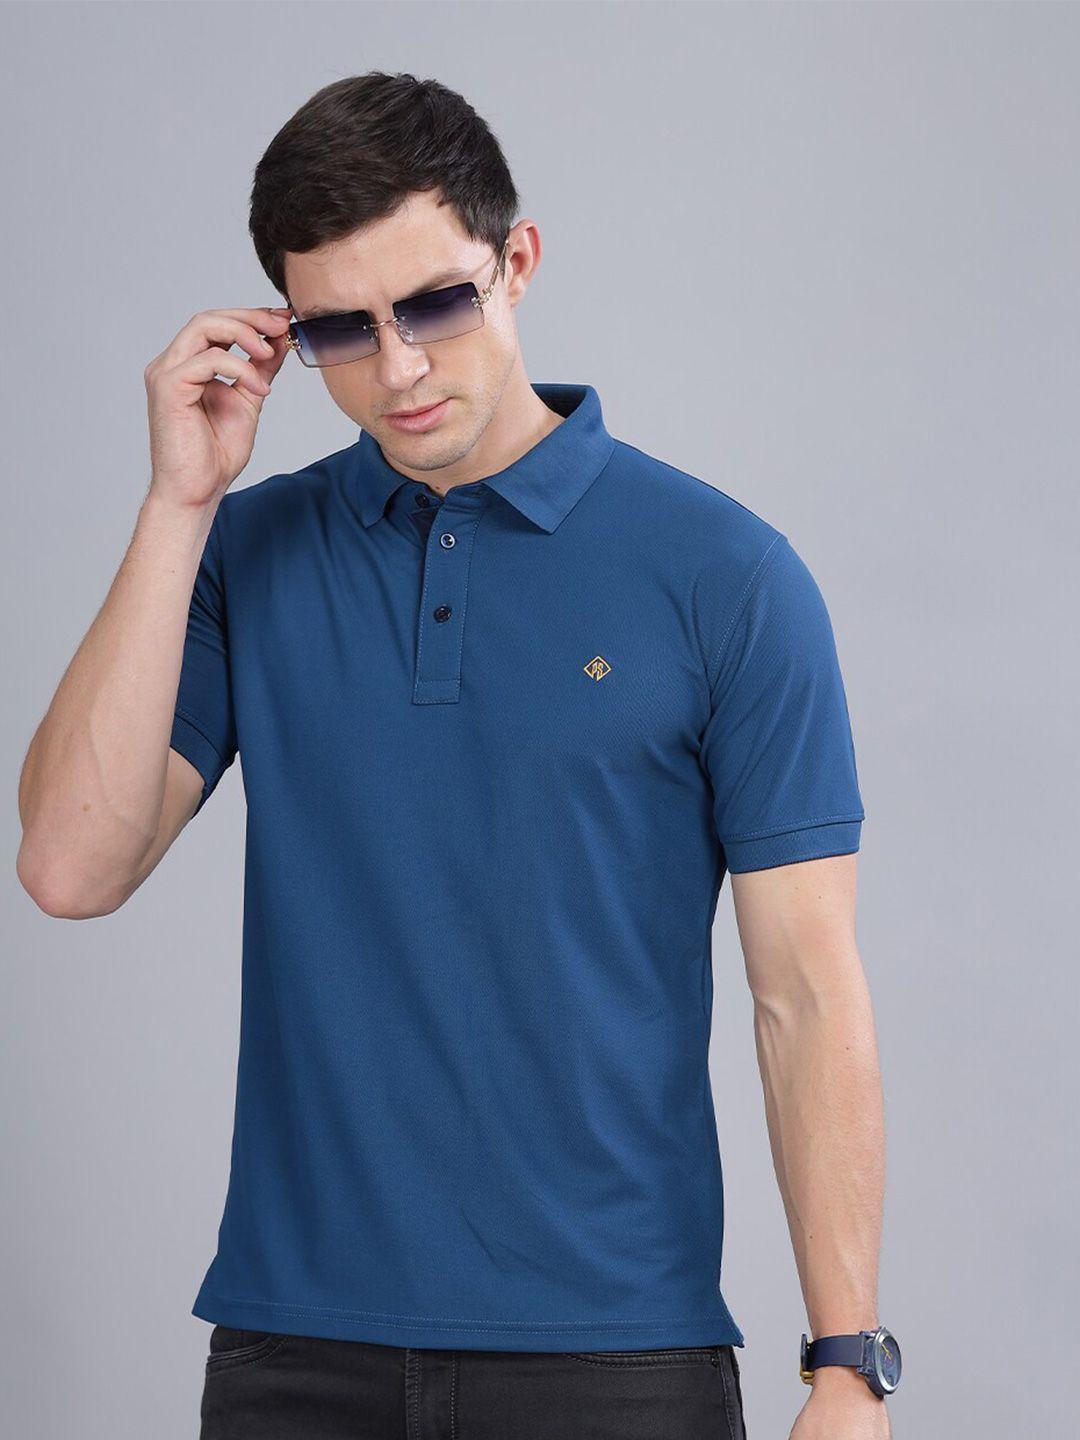 paul-street-slim-fit-moisture-wicking-dry-fit-polo-collar-t-shirt